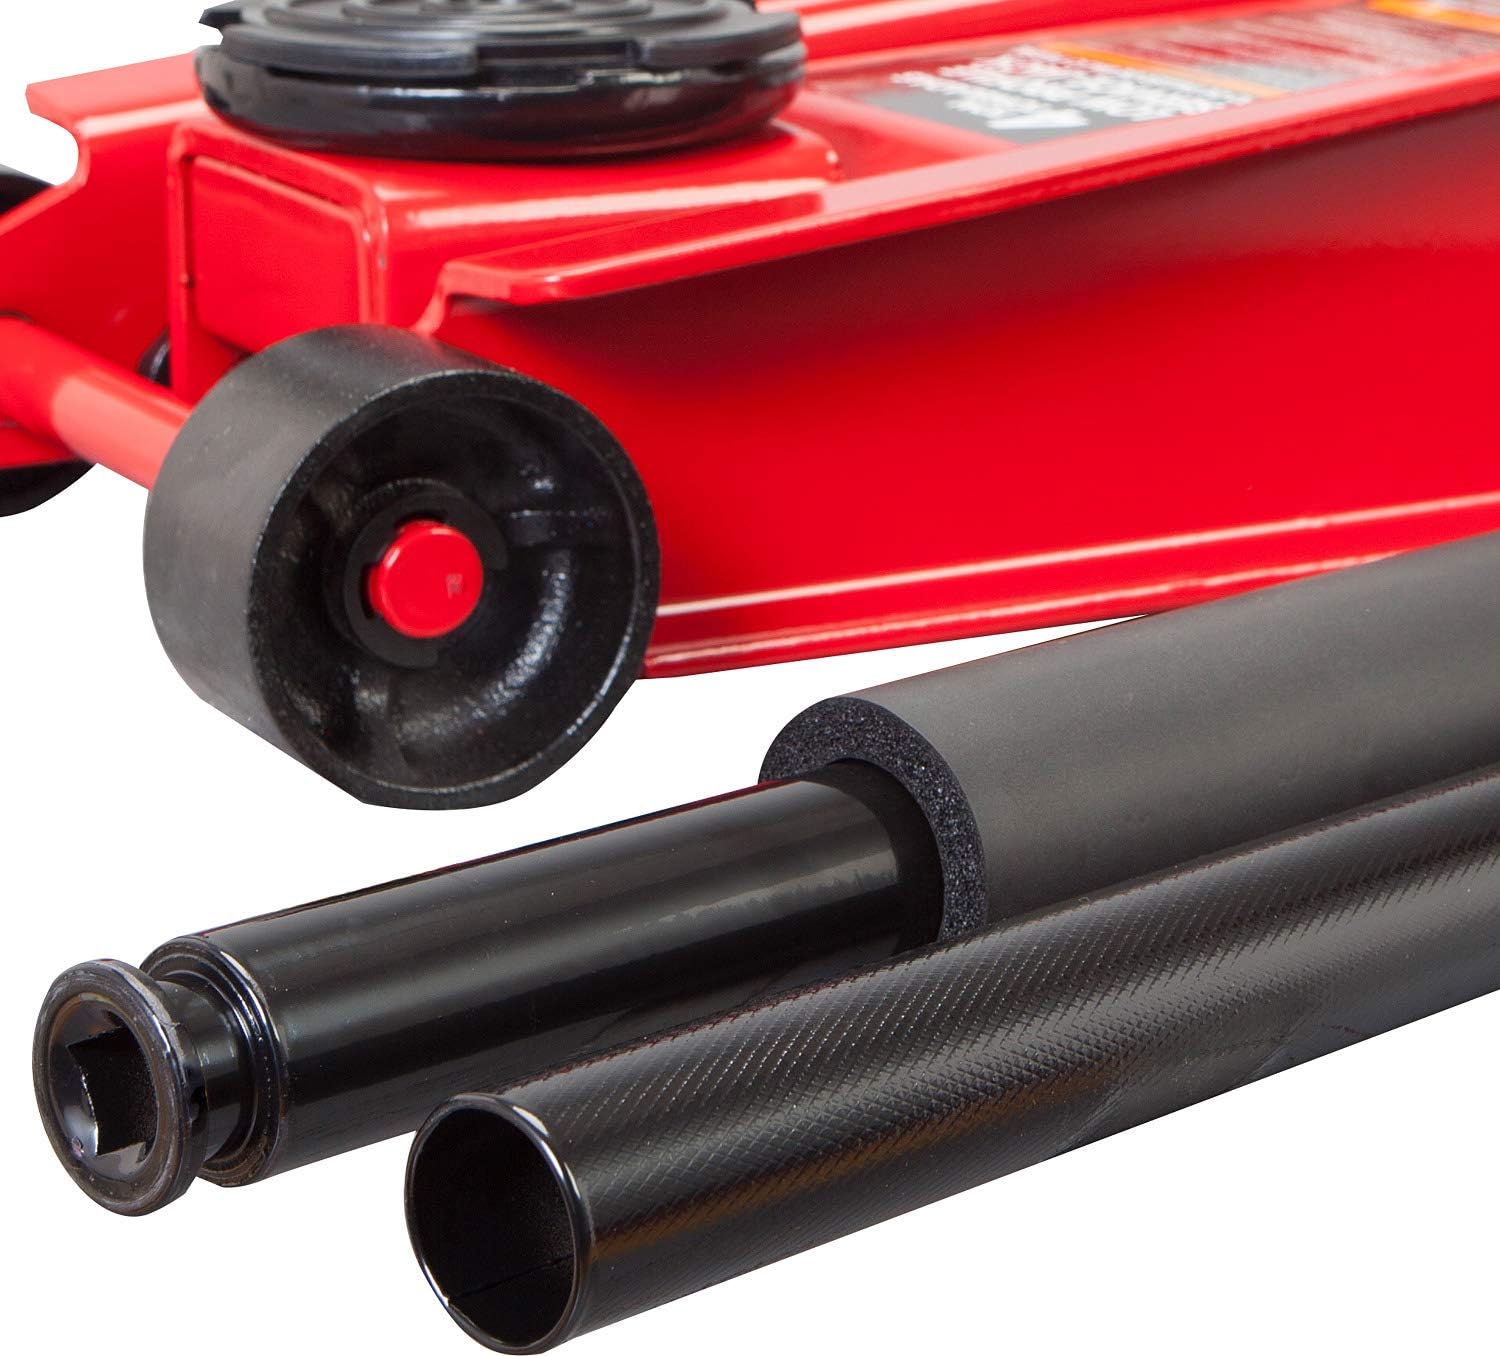 BIG RED AT84007R Torin Hydraulic Low Profile Service/Floor Jack, Red - $145